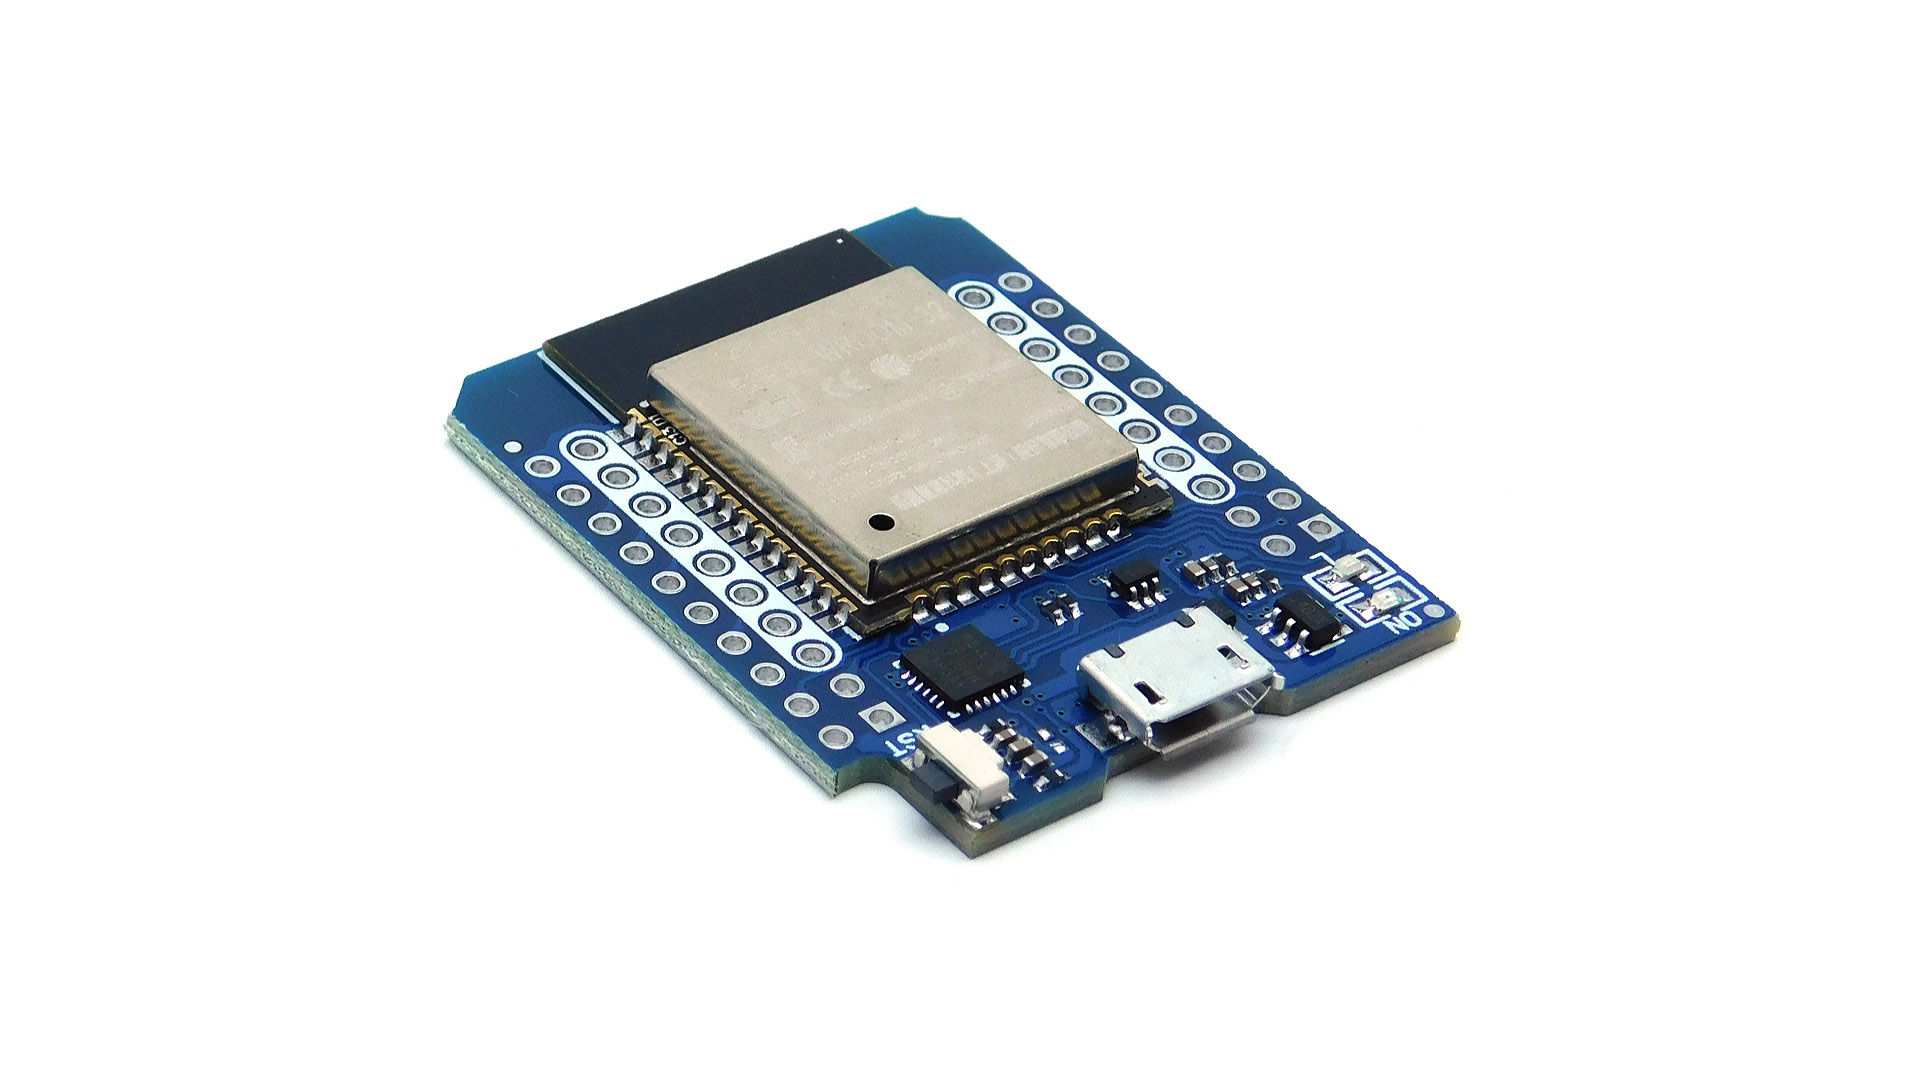 Buy ESP32 WiFi - Bluetooth Developement Kit with cheap price